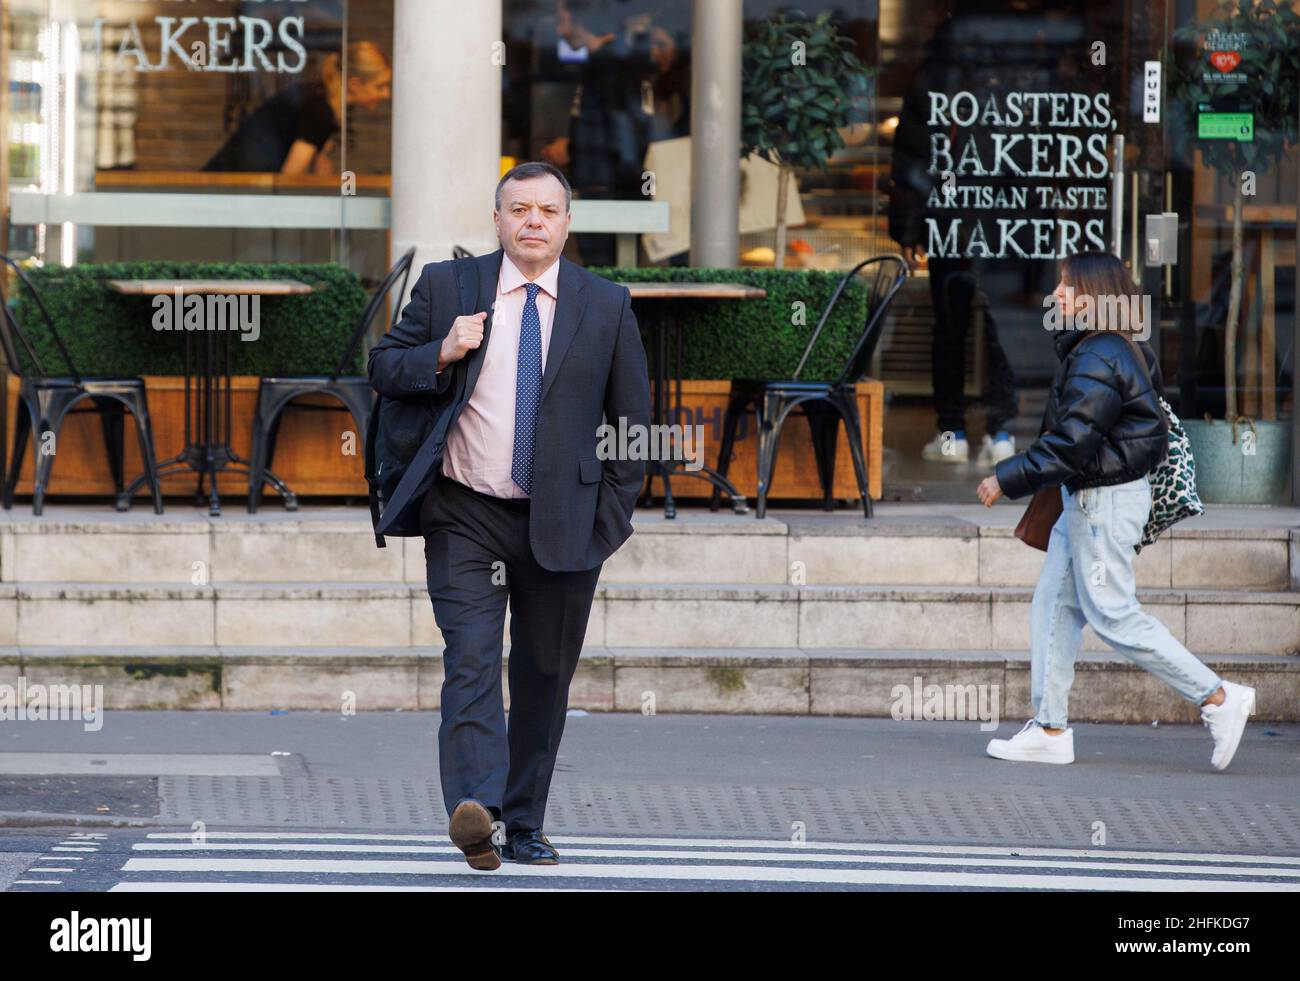 London, UK. 17th Jan, 2022. Businessman Arron Banks arrives at the High Court on Day 2 of his libel case against Carole Cadwalladr. Credit: Mark Thomas/Alamy Live News Stock Photo